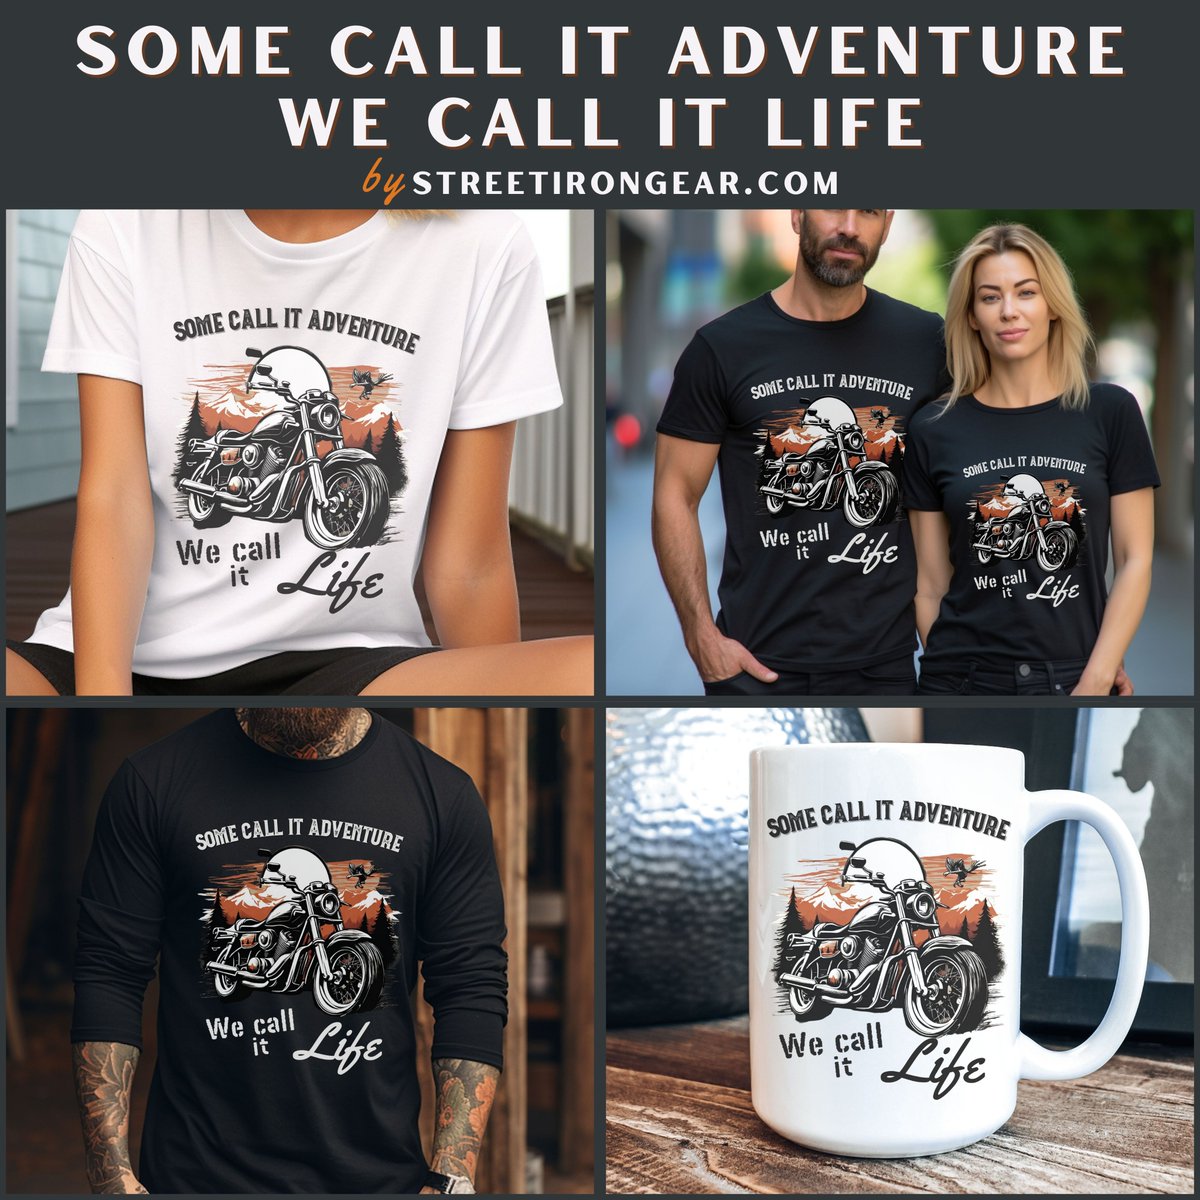 Some call it adventure, we call it life. Popular products featuring a motorcycle cruiser that embodies the rider's spirit. It's more than a journey; it's who we are. Check it out on StreetIronGear.com! 
#RideOrDie #MotorcycleLife #AdventureSoul #OpenRoad #BikerLifestyle